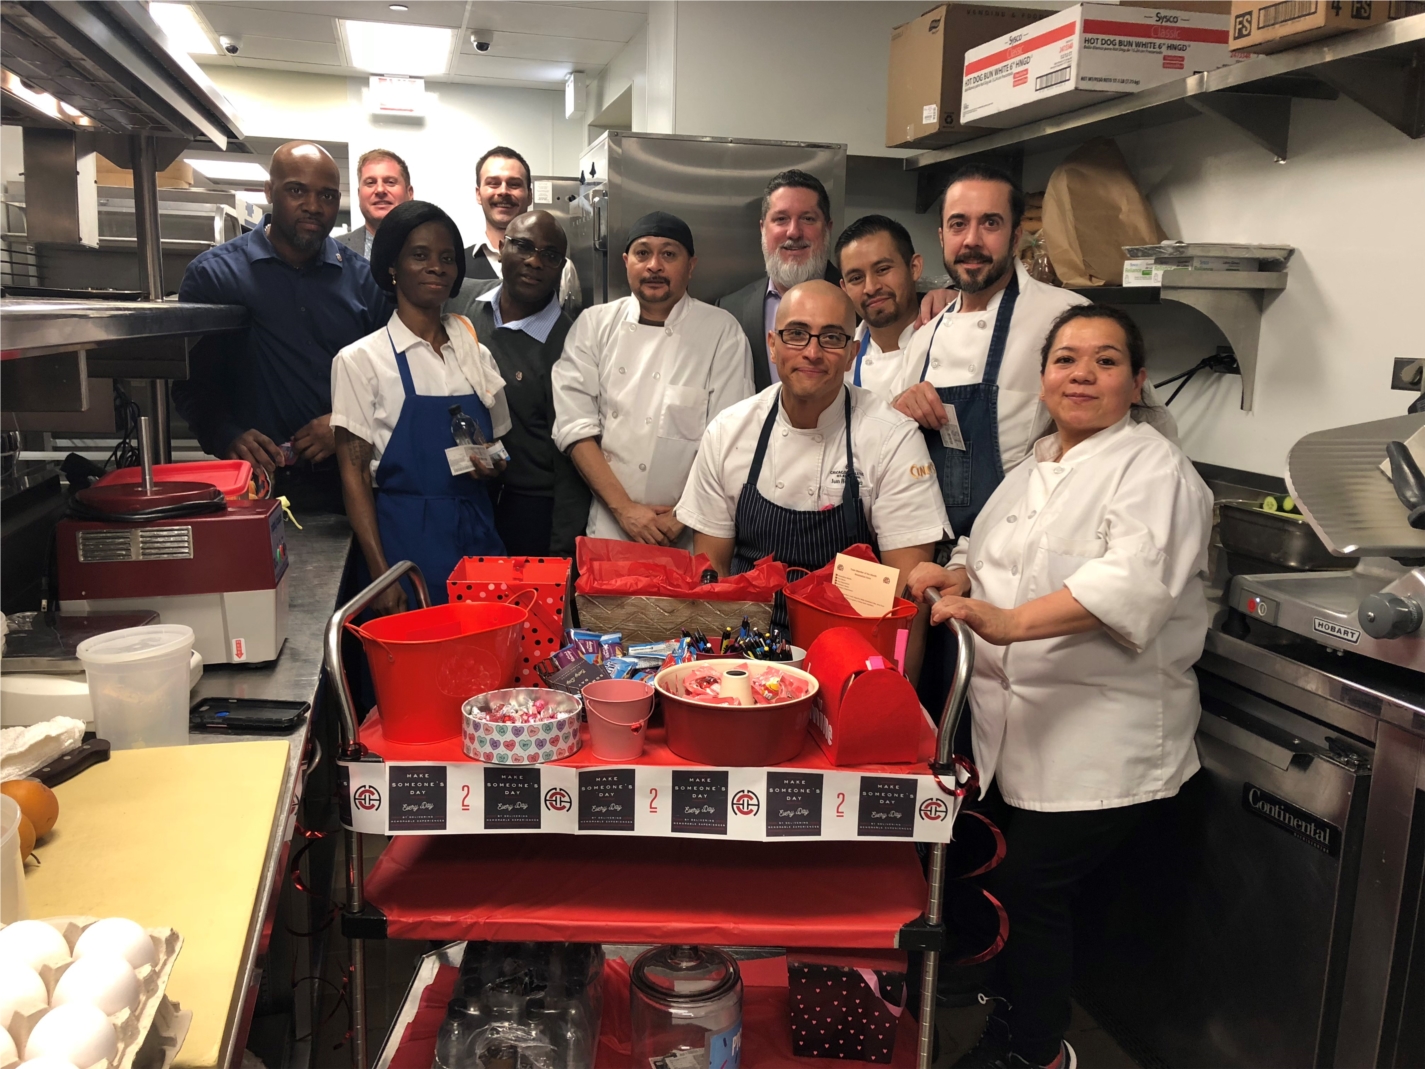 "Make Someone's Day" cart roams Chicago Athletic Association sharing treats and service recognition with team members!